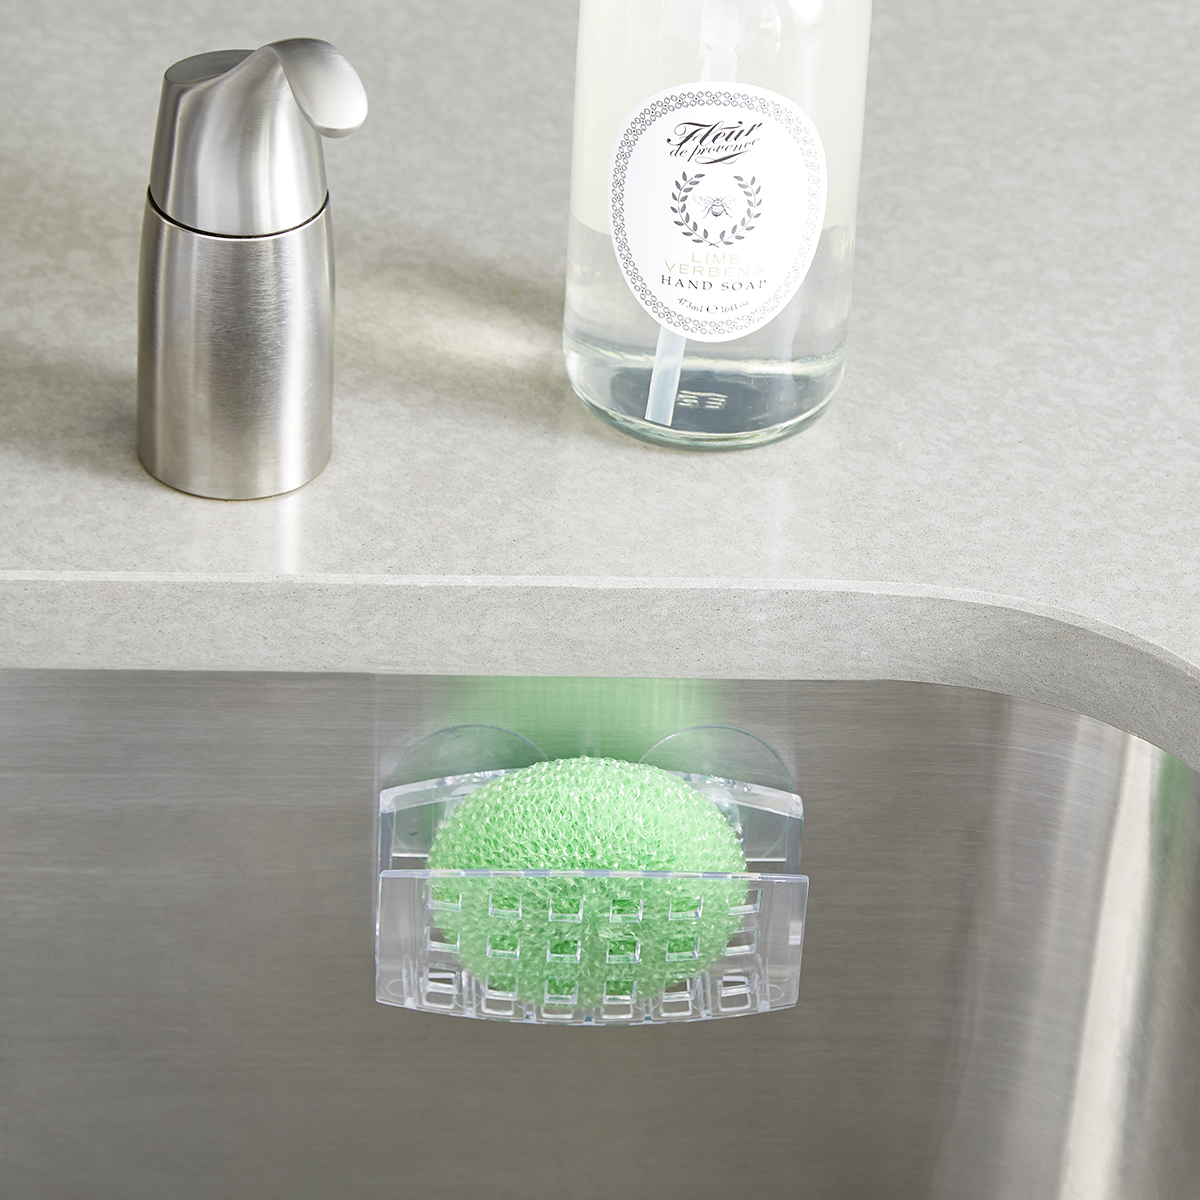 https://www.containerstore.com/catalogimages/330698/428856-Suction-Sponge-Holder.jpg